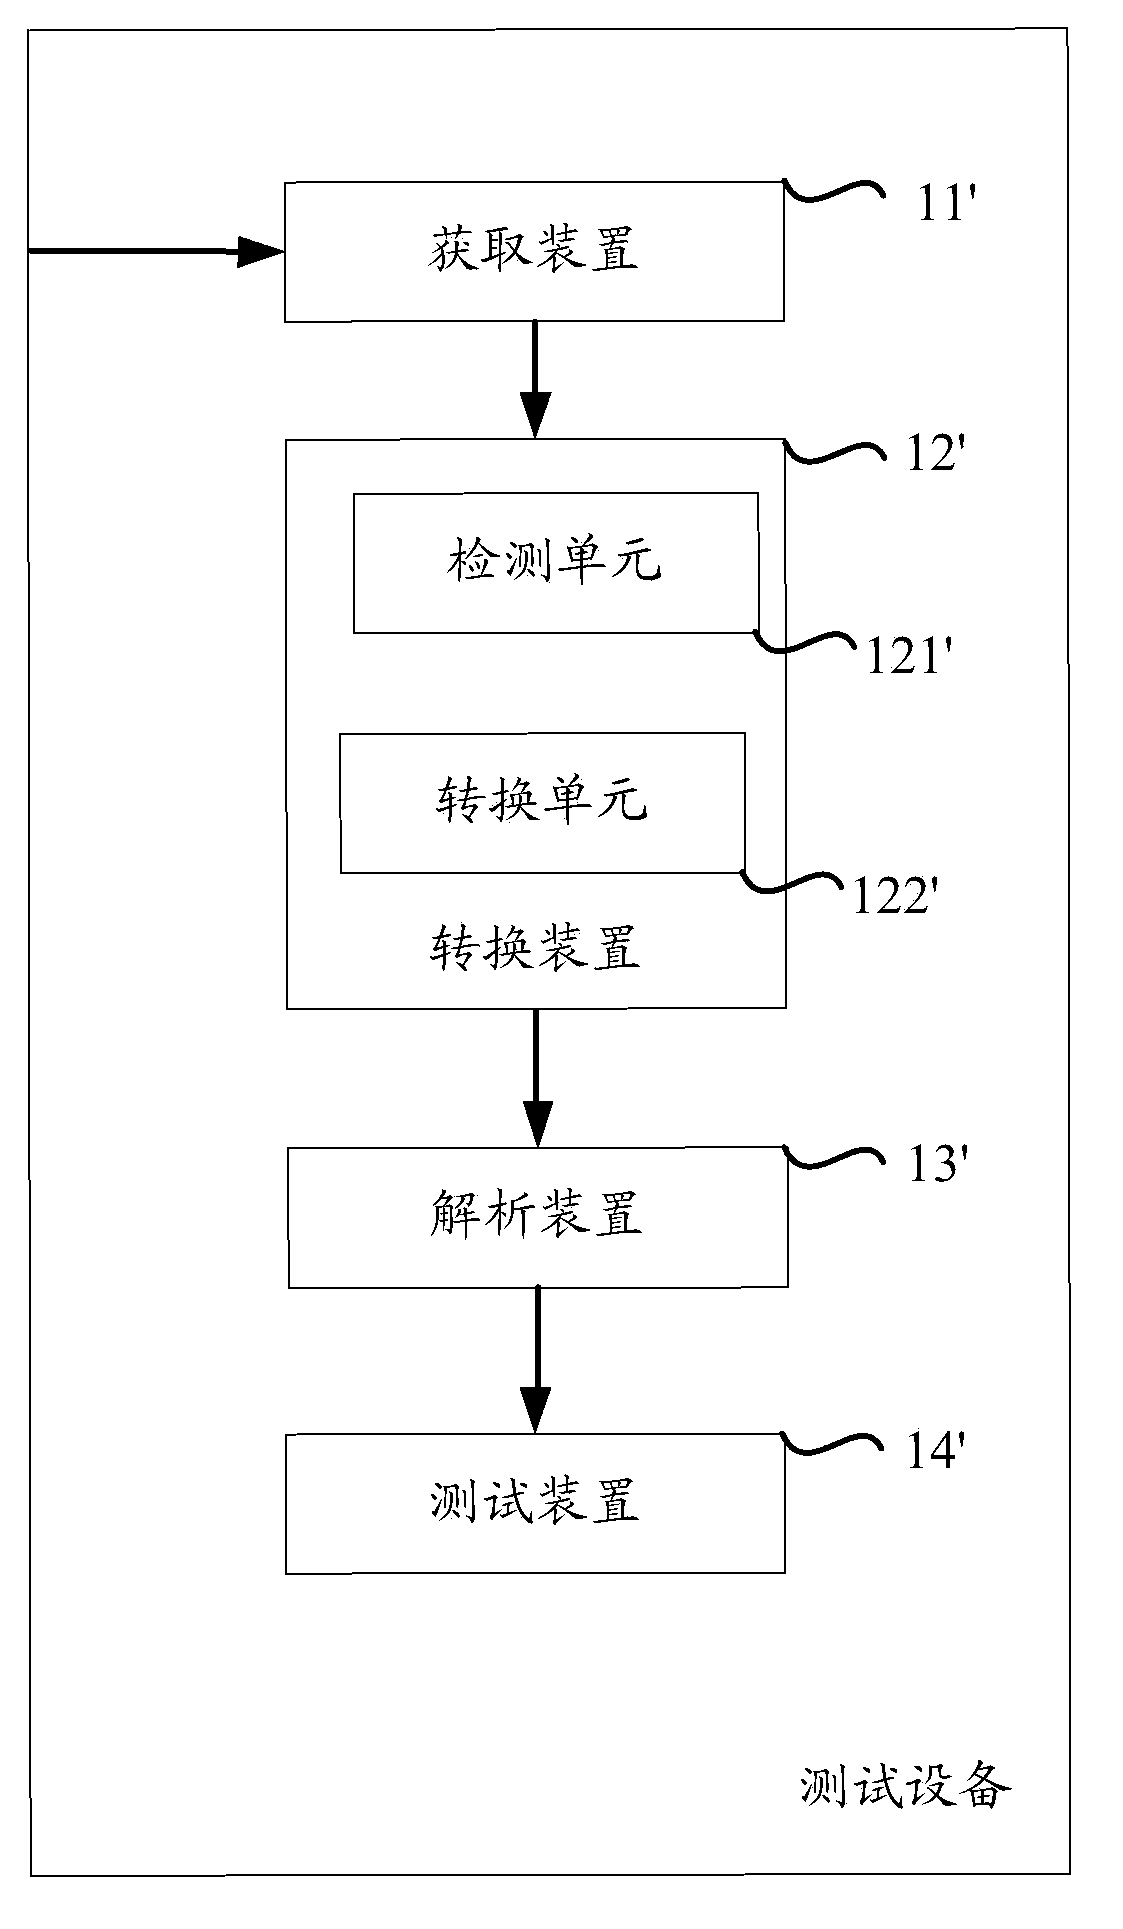 Method and device for carrying out page testing